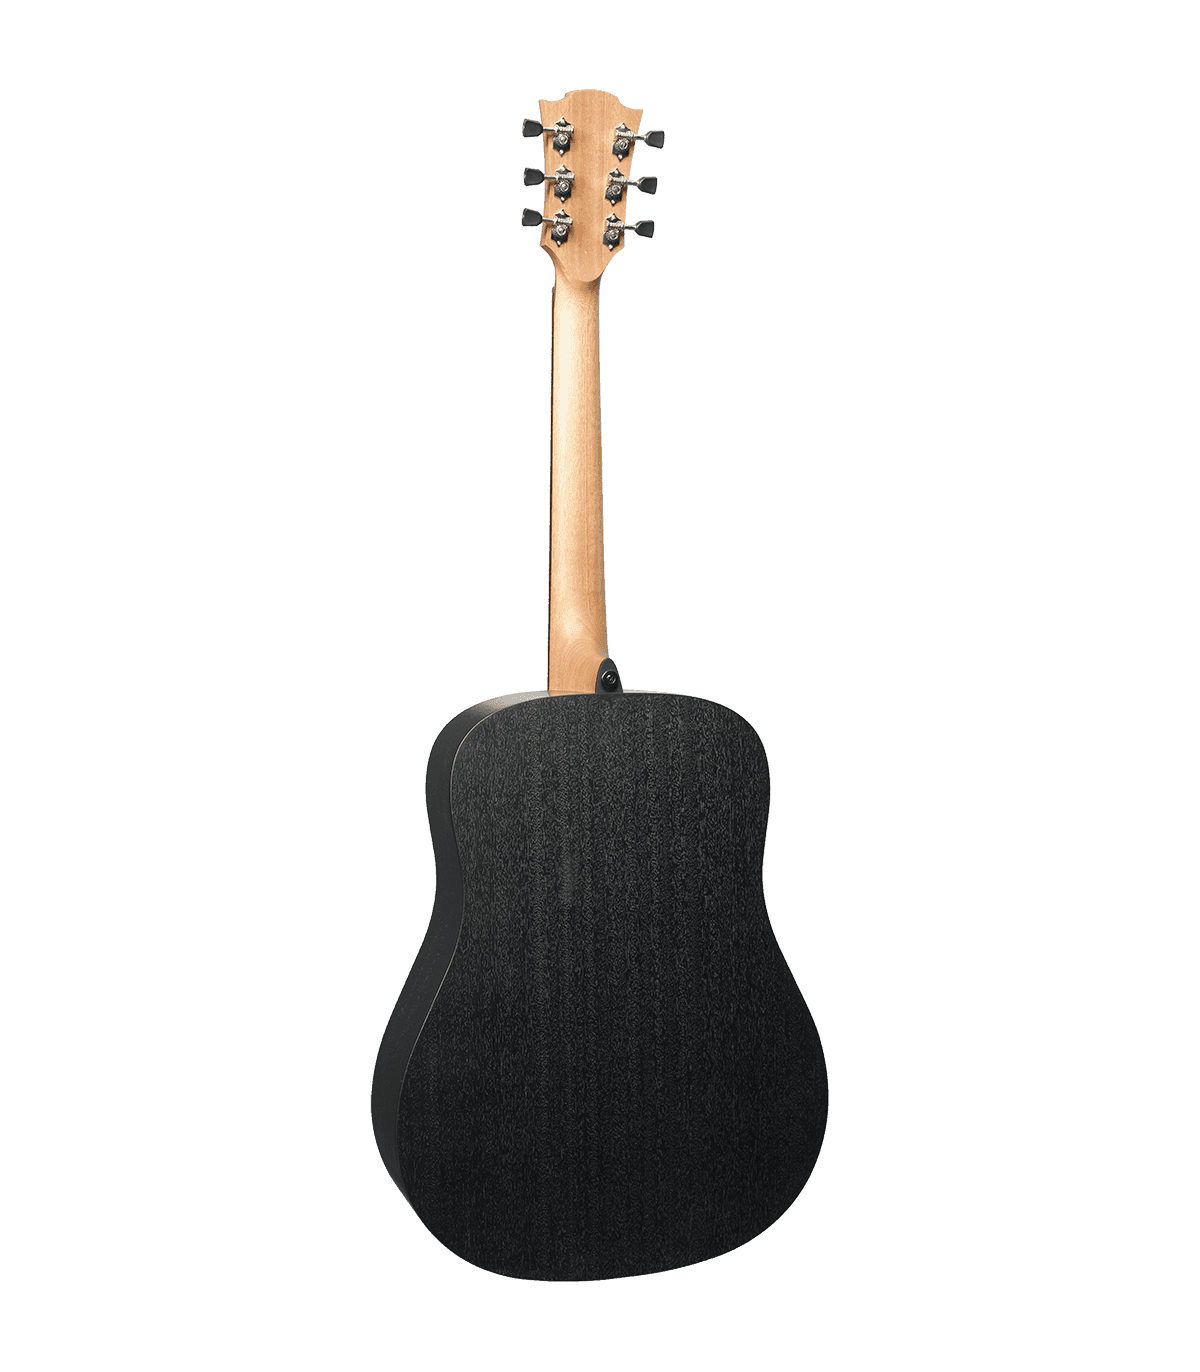 Lag T70D-B&B TRAMONTANE Dreadnought, Electro Acoustic Guitar for sale at Richards Guitars.